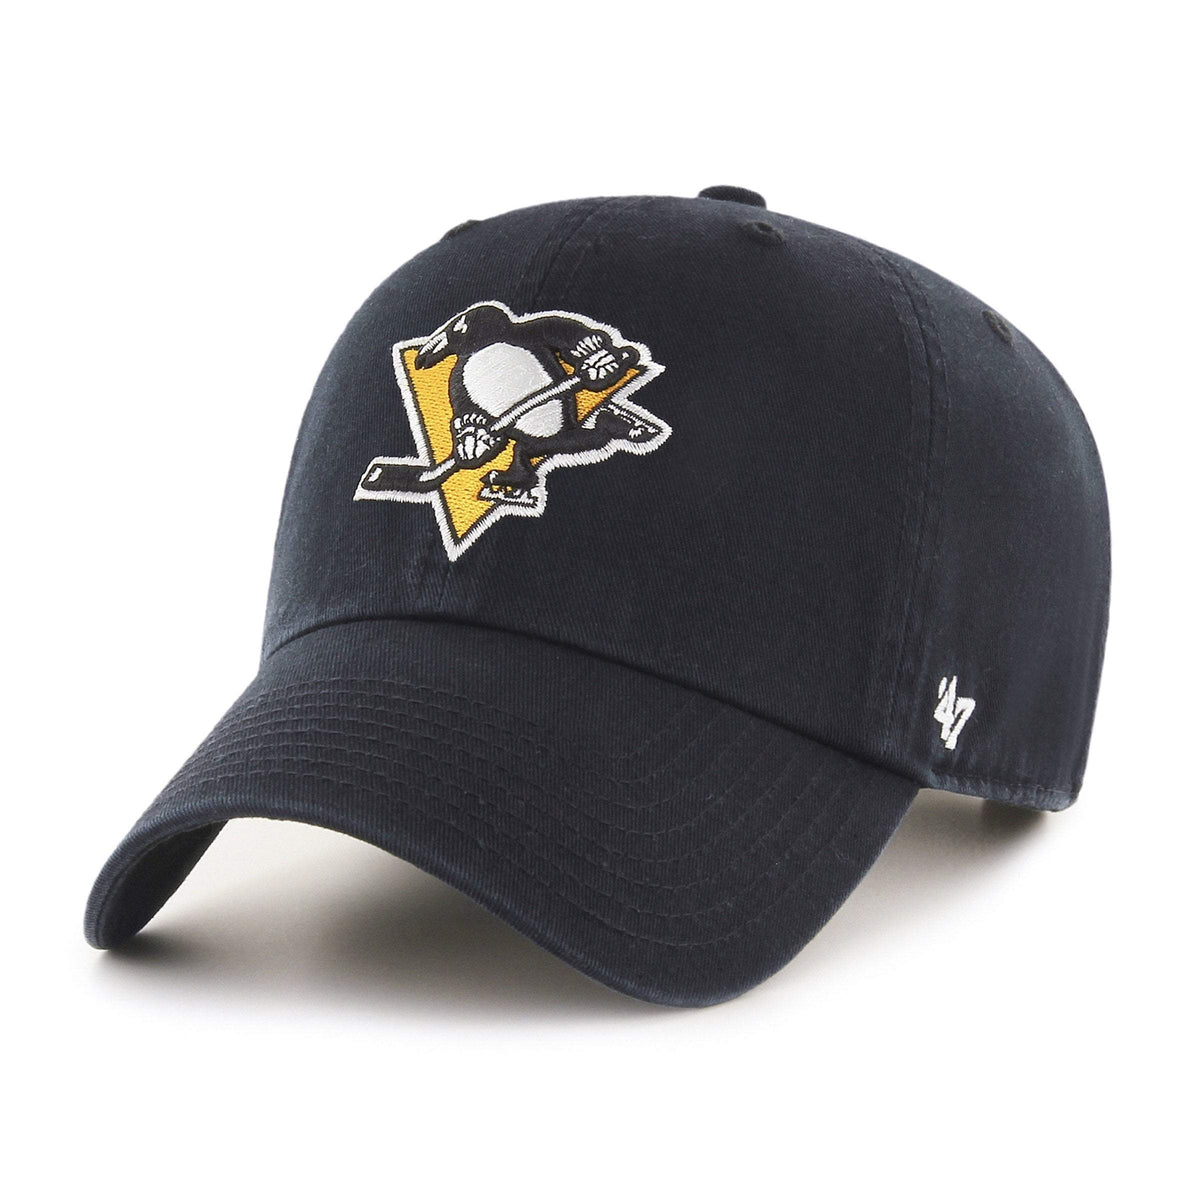 PITTSBURGH PENGUINS '47 CLEAN UP